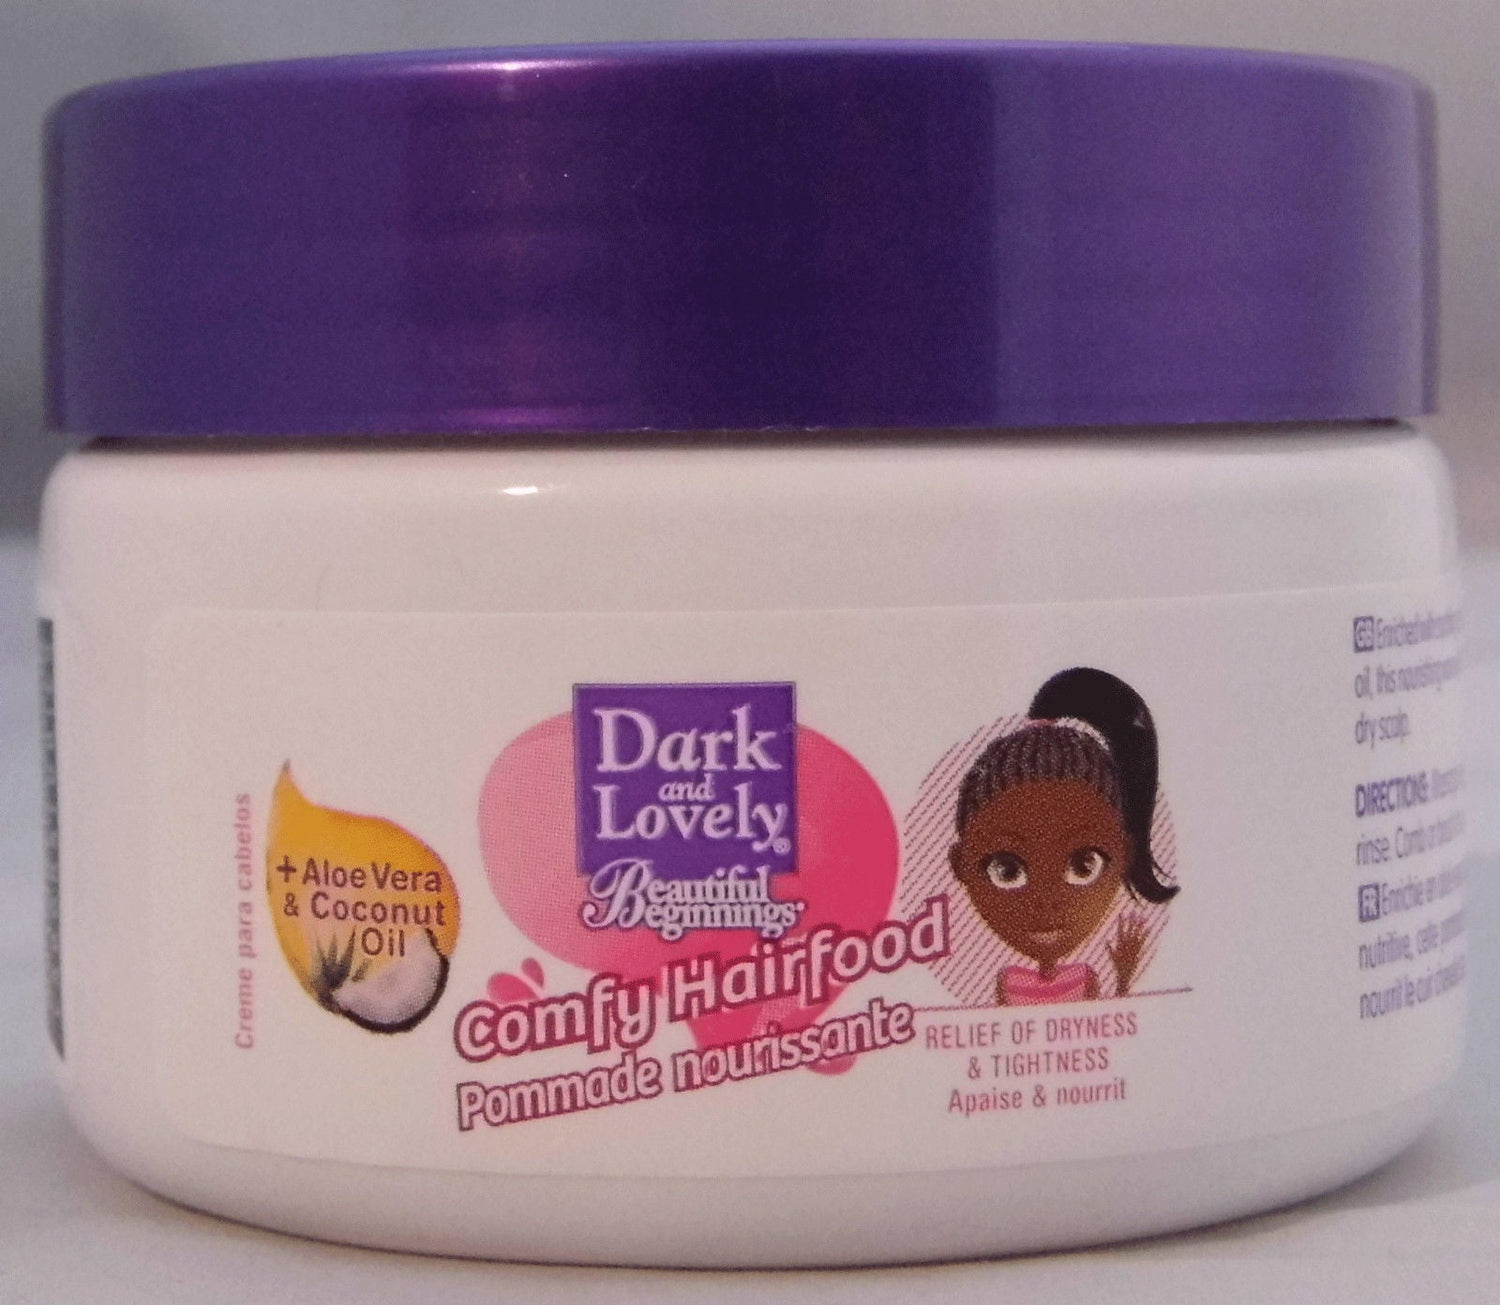 Dark and lovely Beautiful Beginning Kids Products